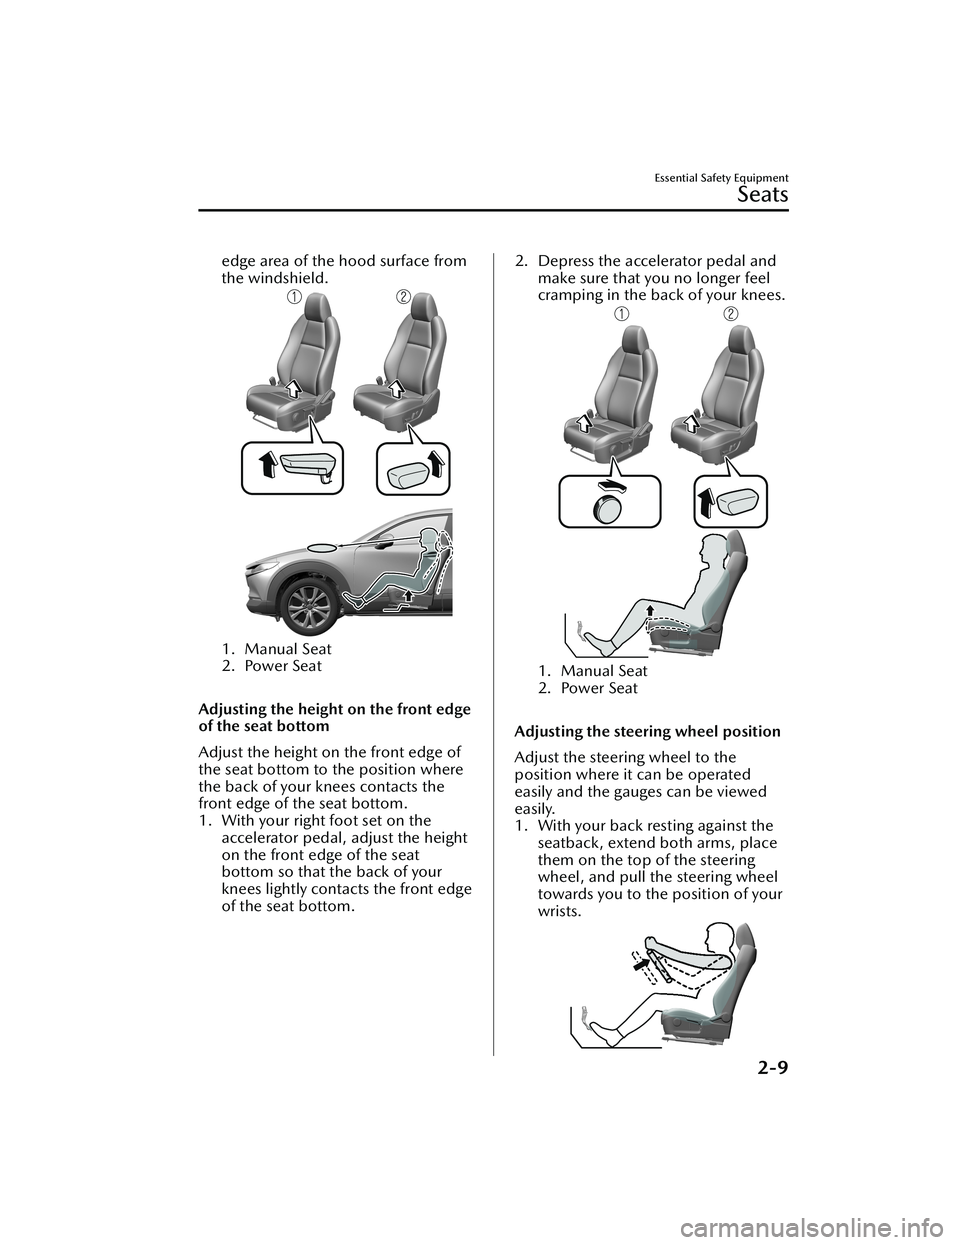 MAZDA MODEL CX-30 2020  Owners Manual edge area of the hood surface from
the windshield.
1. Manual Seat
2. Power Seat
 
Adjusting the height on the front edge
of the seat bottom
Adjust the height on the front edge of
the seat bottom to th